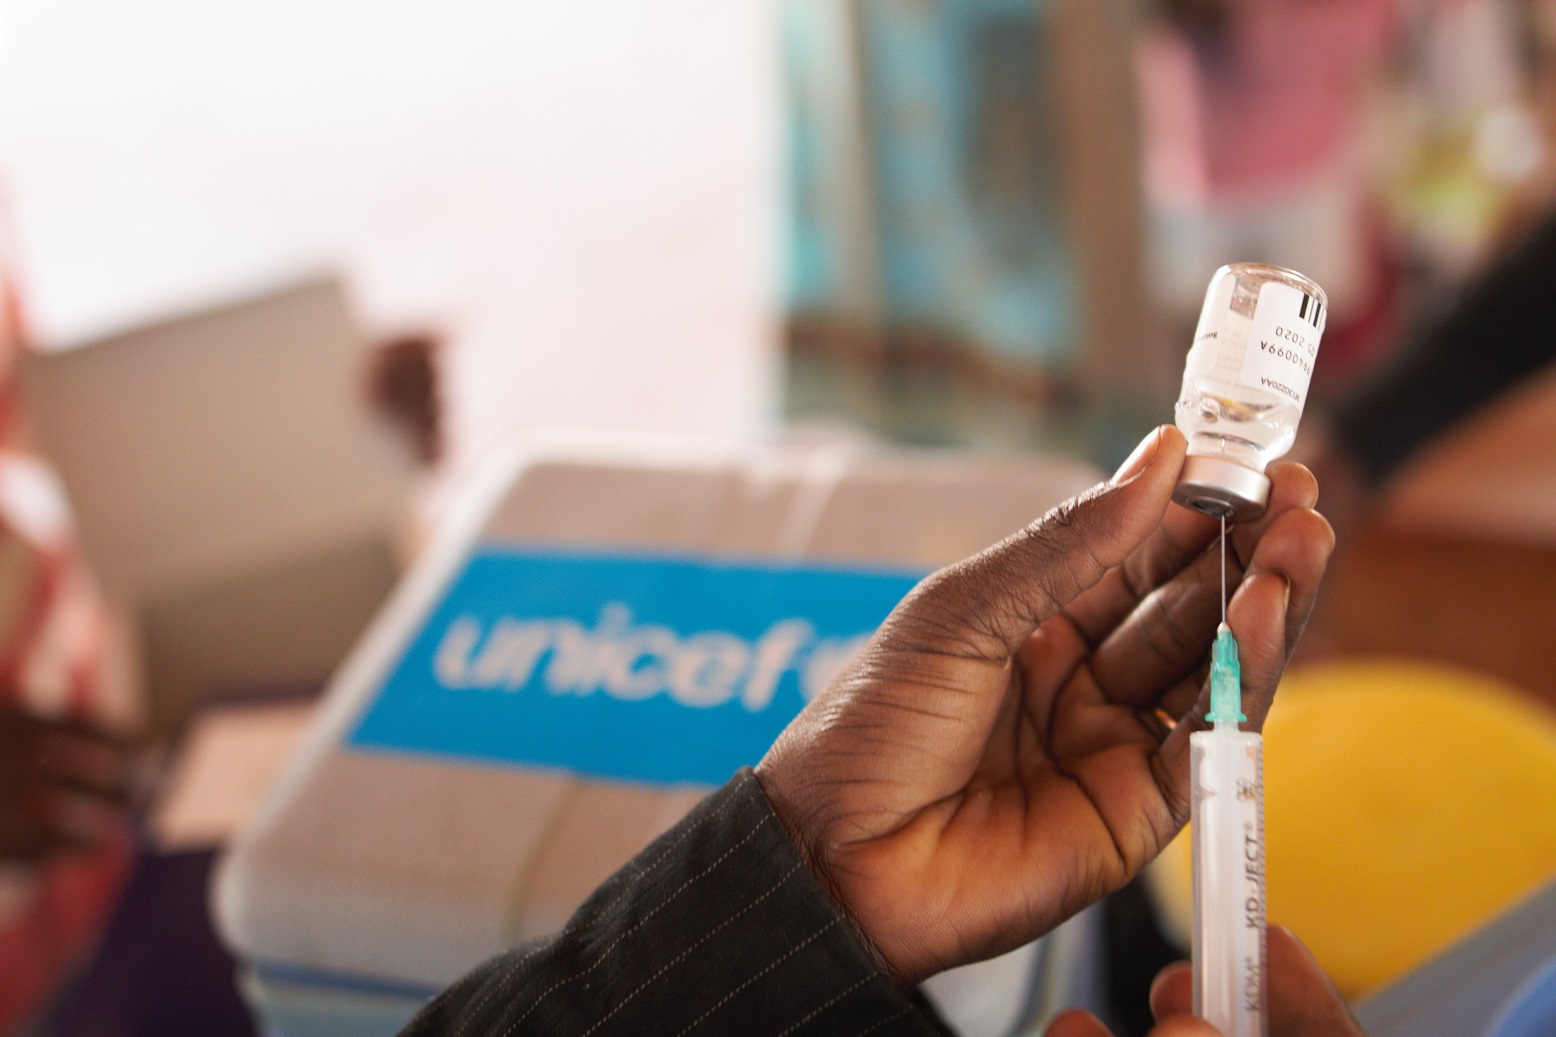 Taking the vaccination campaign on Cape Verde to the next level — TUI Foundation UNICEF's COVID-19 response activities